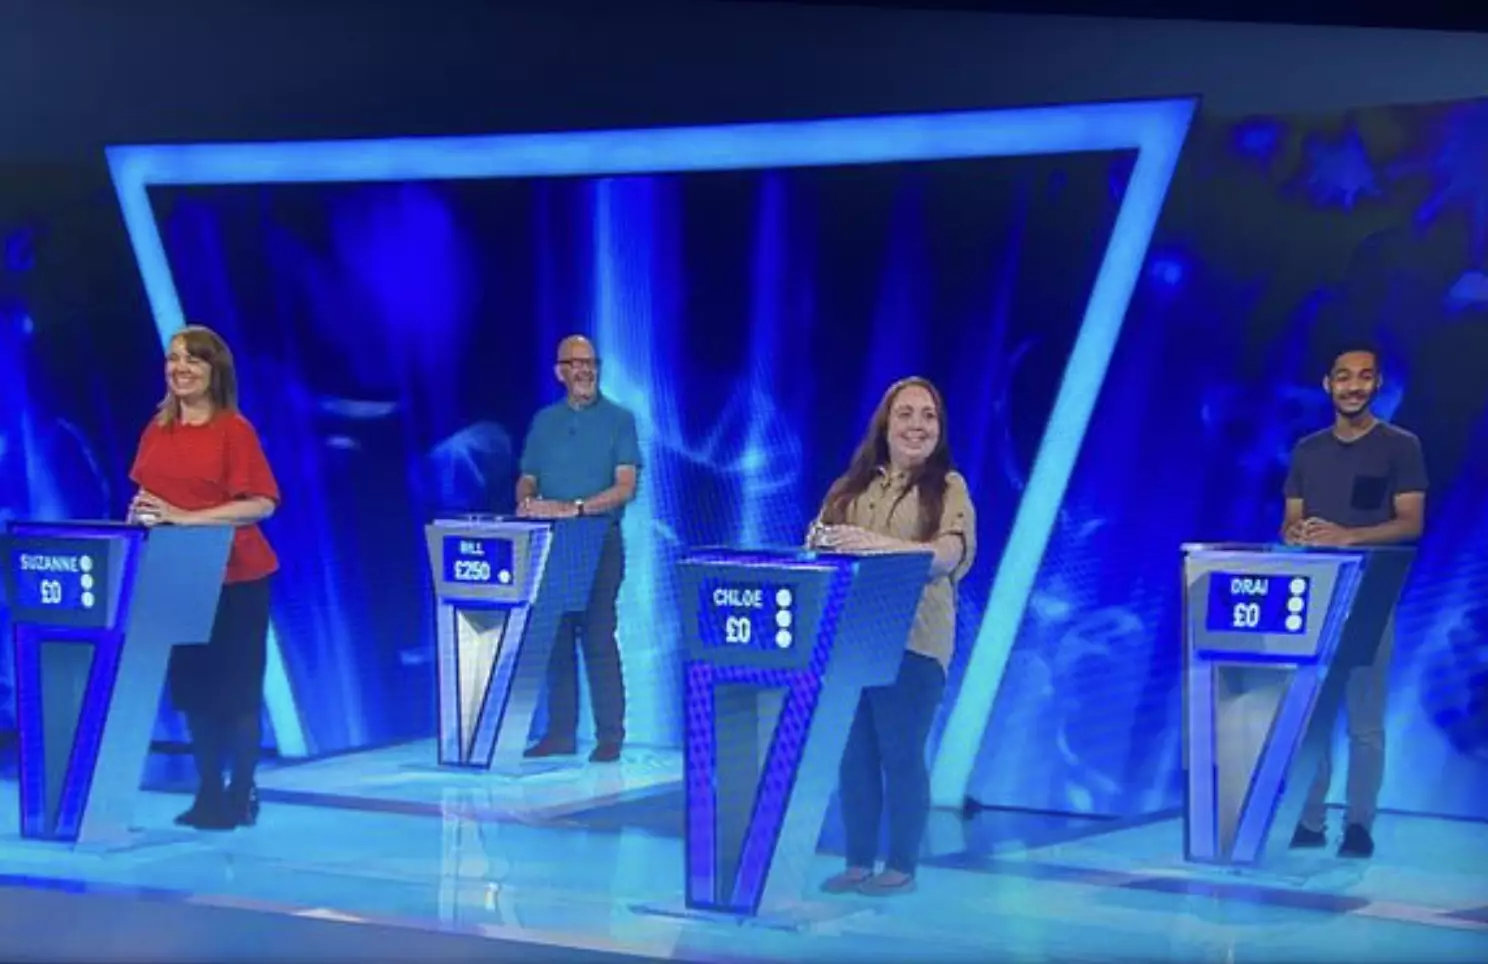 The contestants seemed a little surprised, to say the least.